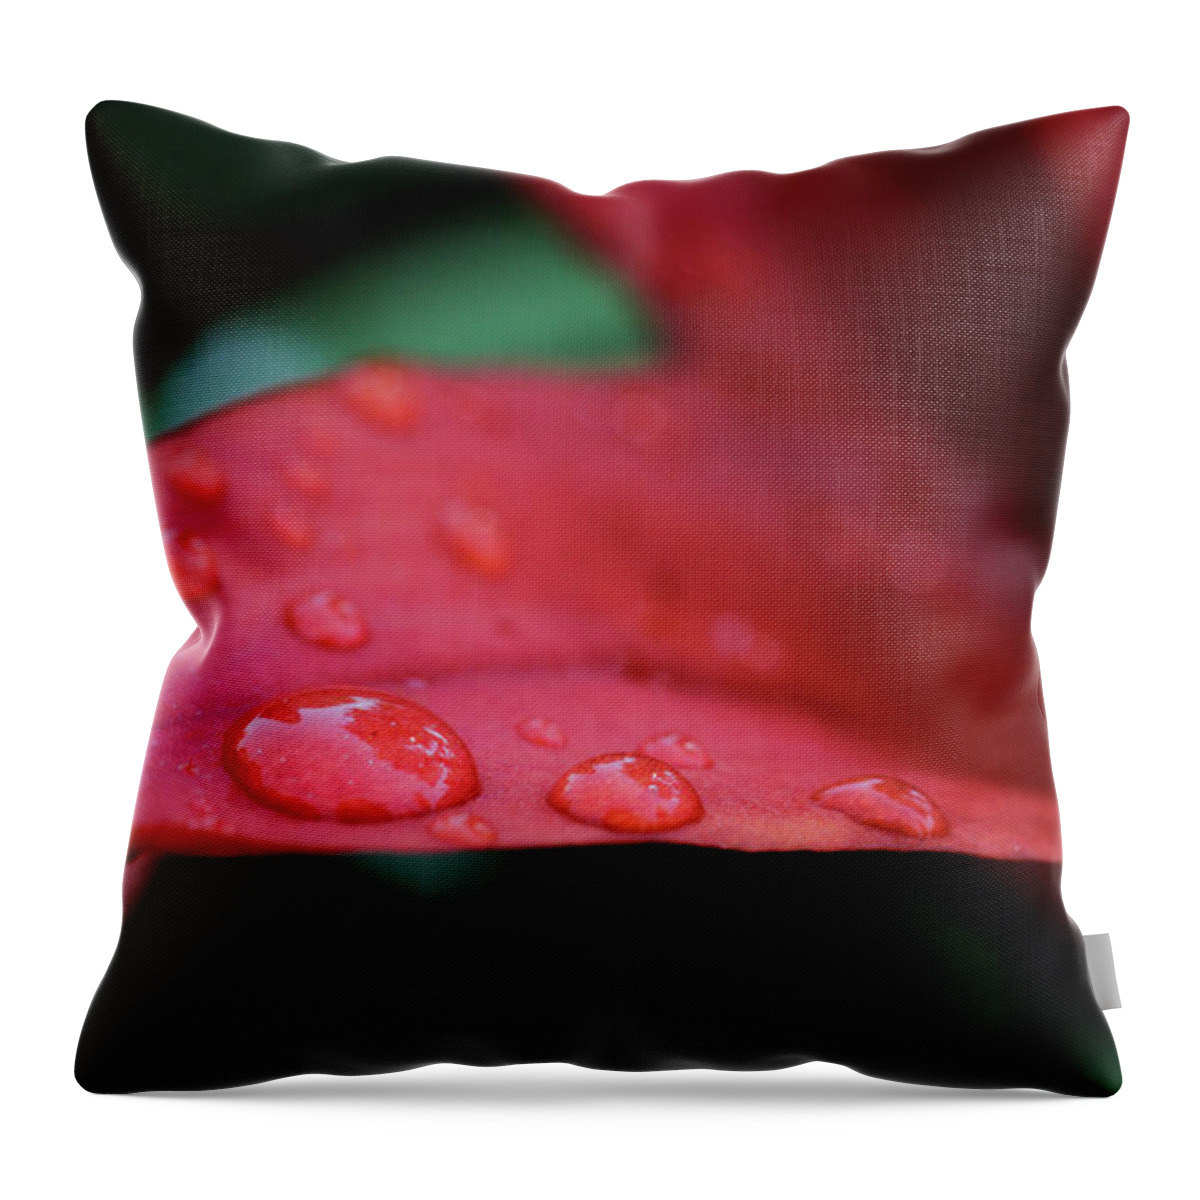 Water Drops Throw Pillow featuring the photograph Water Drops I by Rick Berk